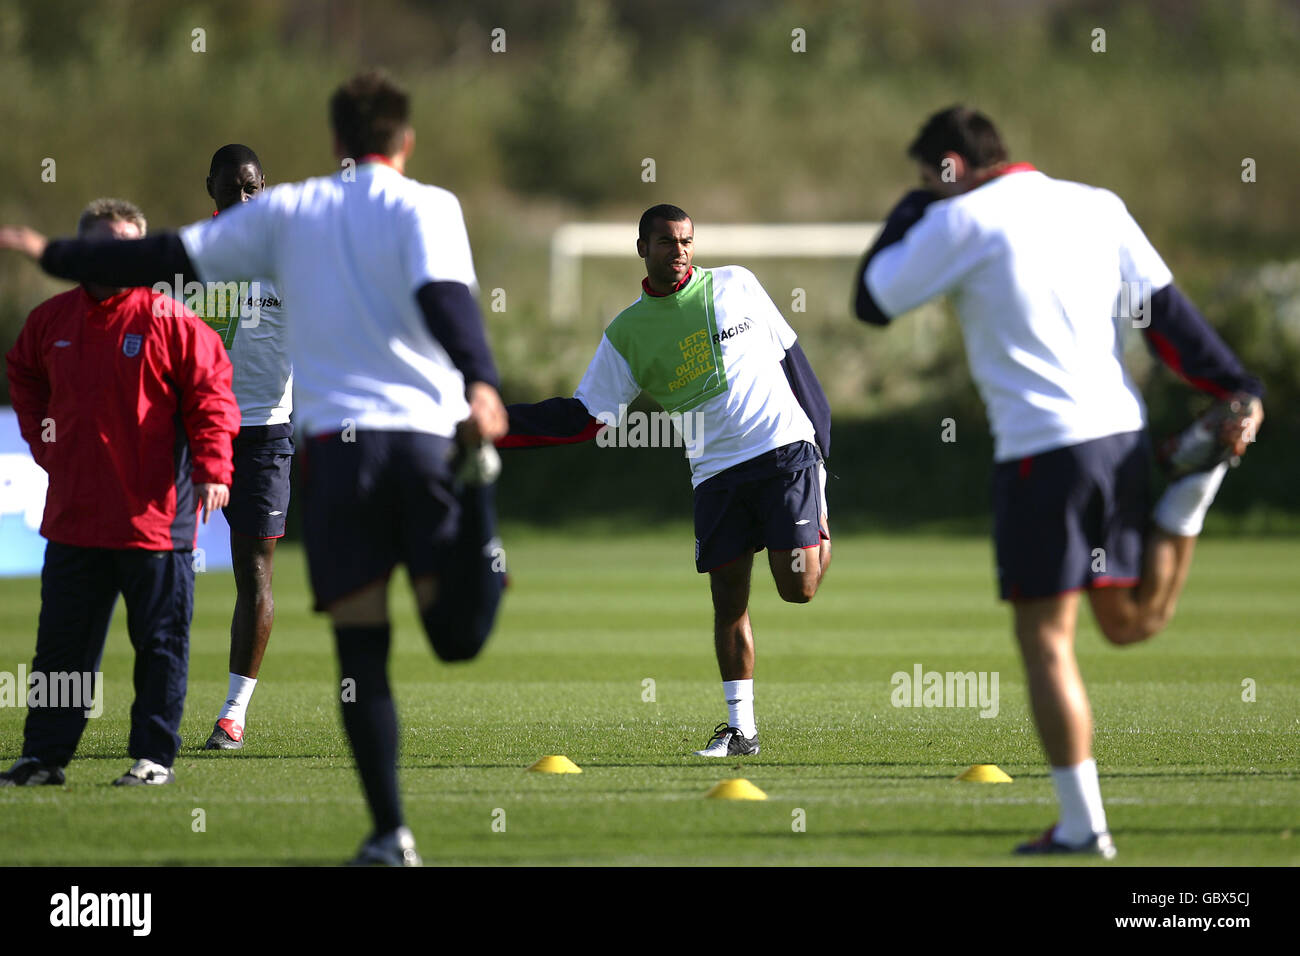 Soccer - FIFA World Cup 2006 Qualifier - Group Six - England Training. England's Ashley Cole Stock Photo